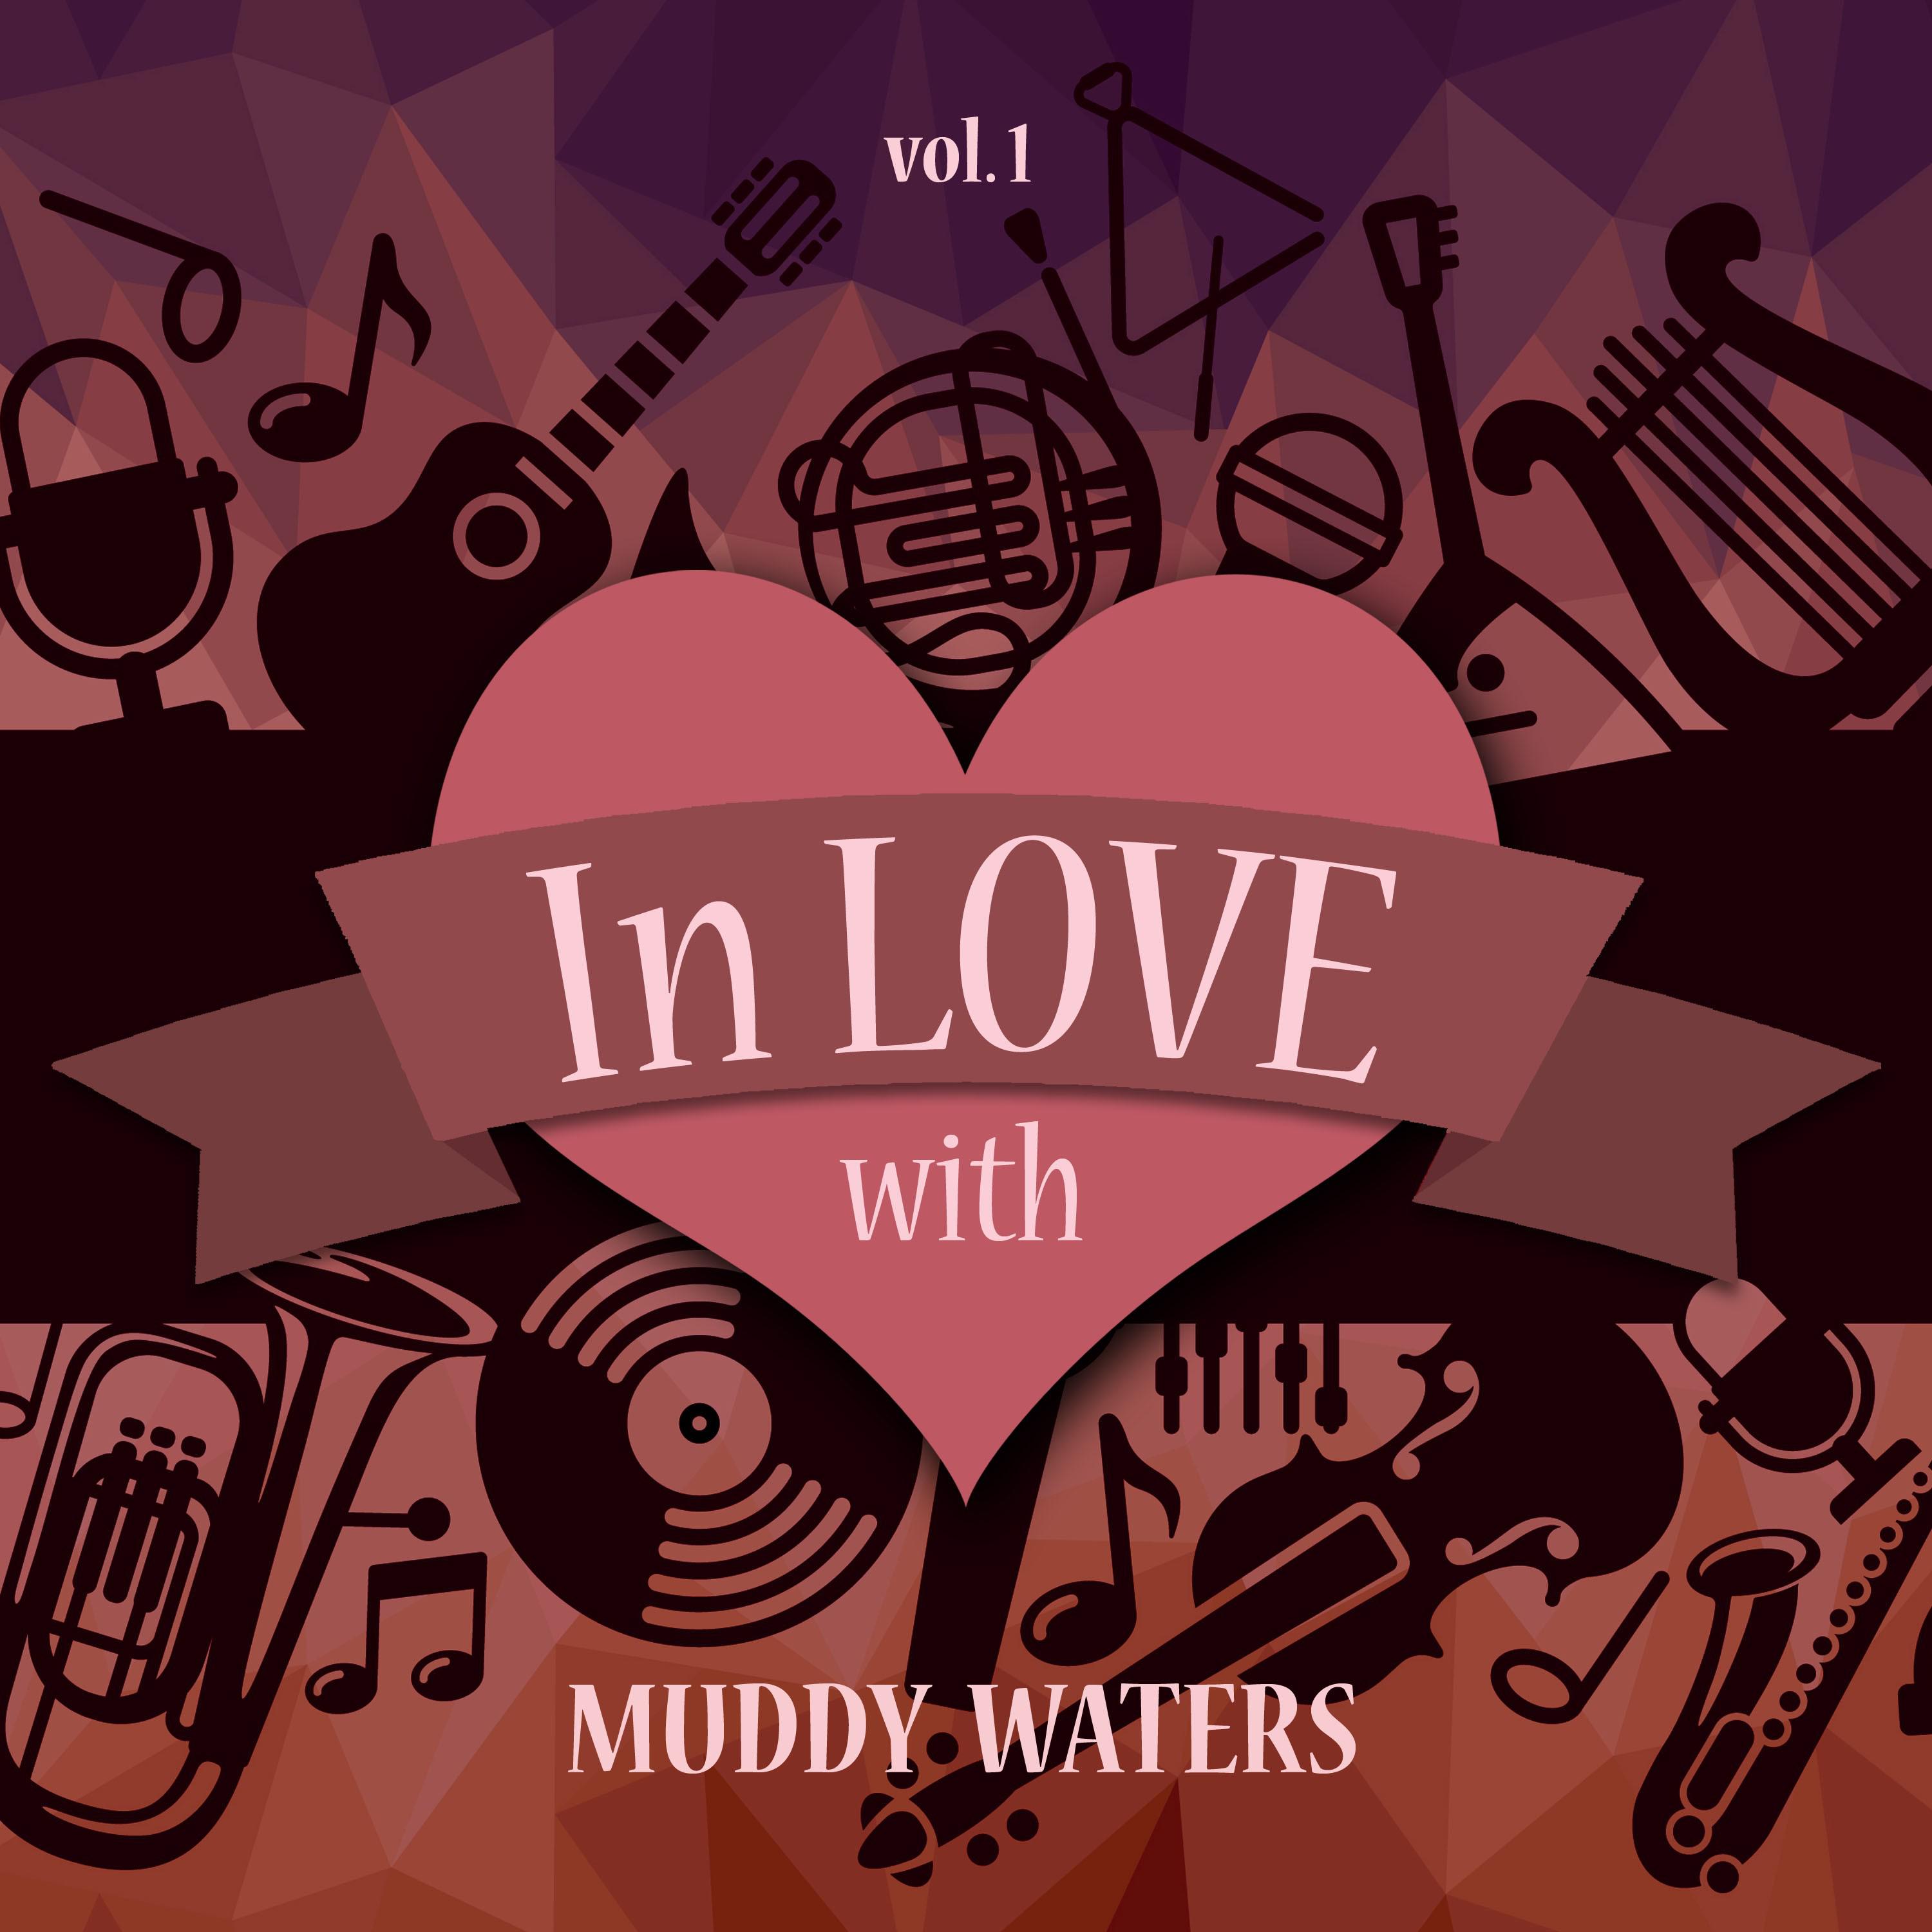 In Love with Muddy Waters, Vol. 1